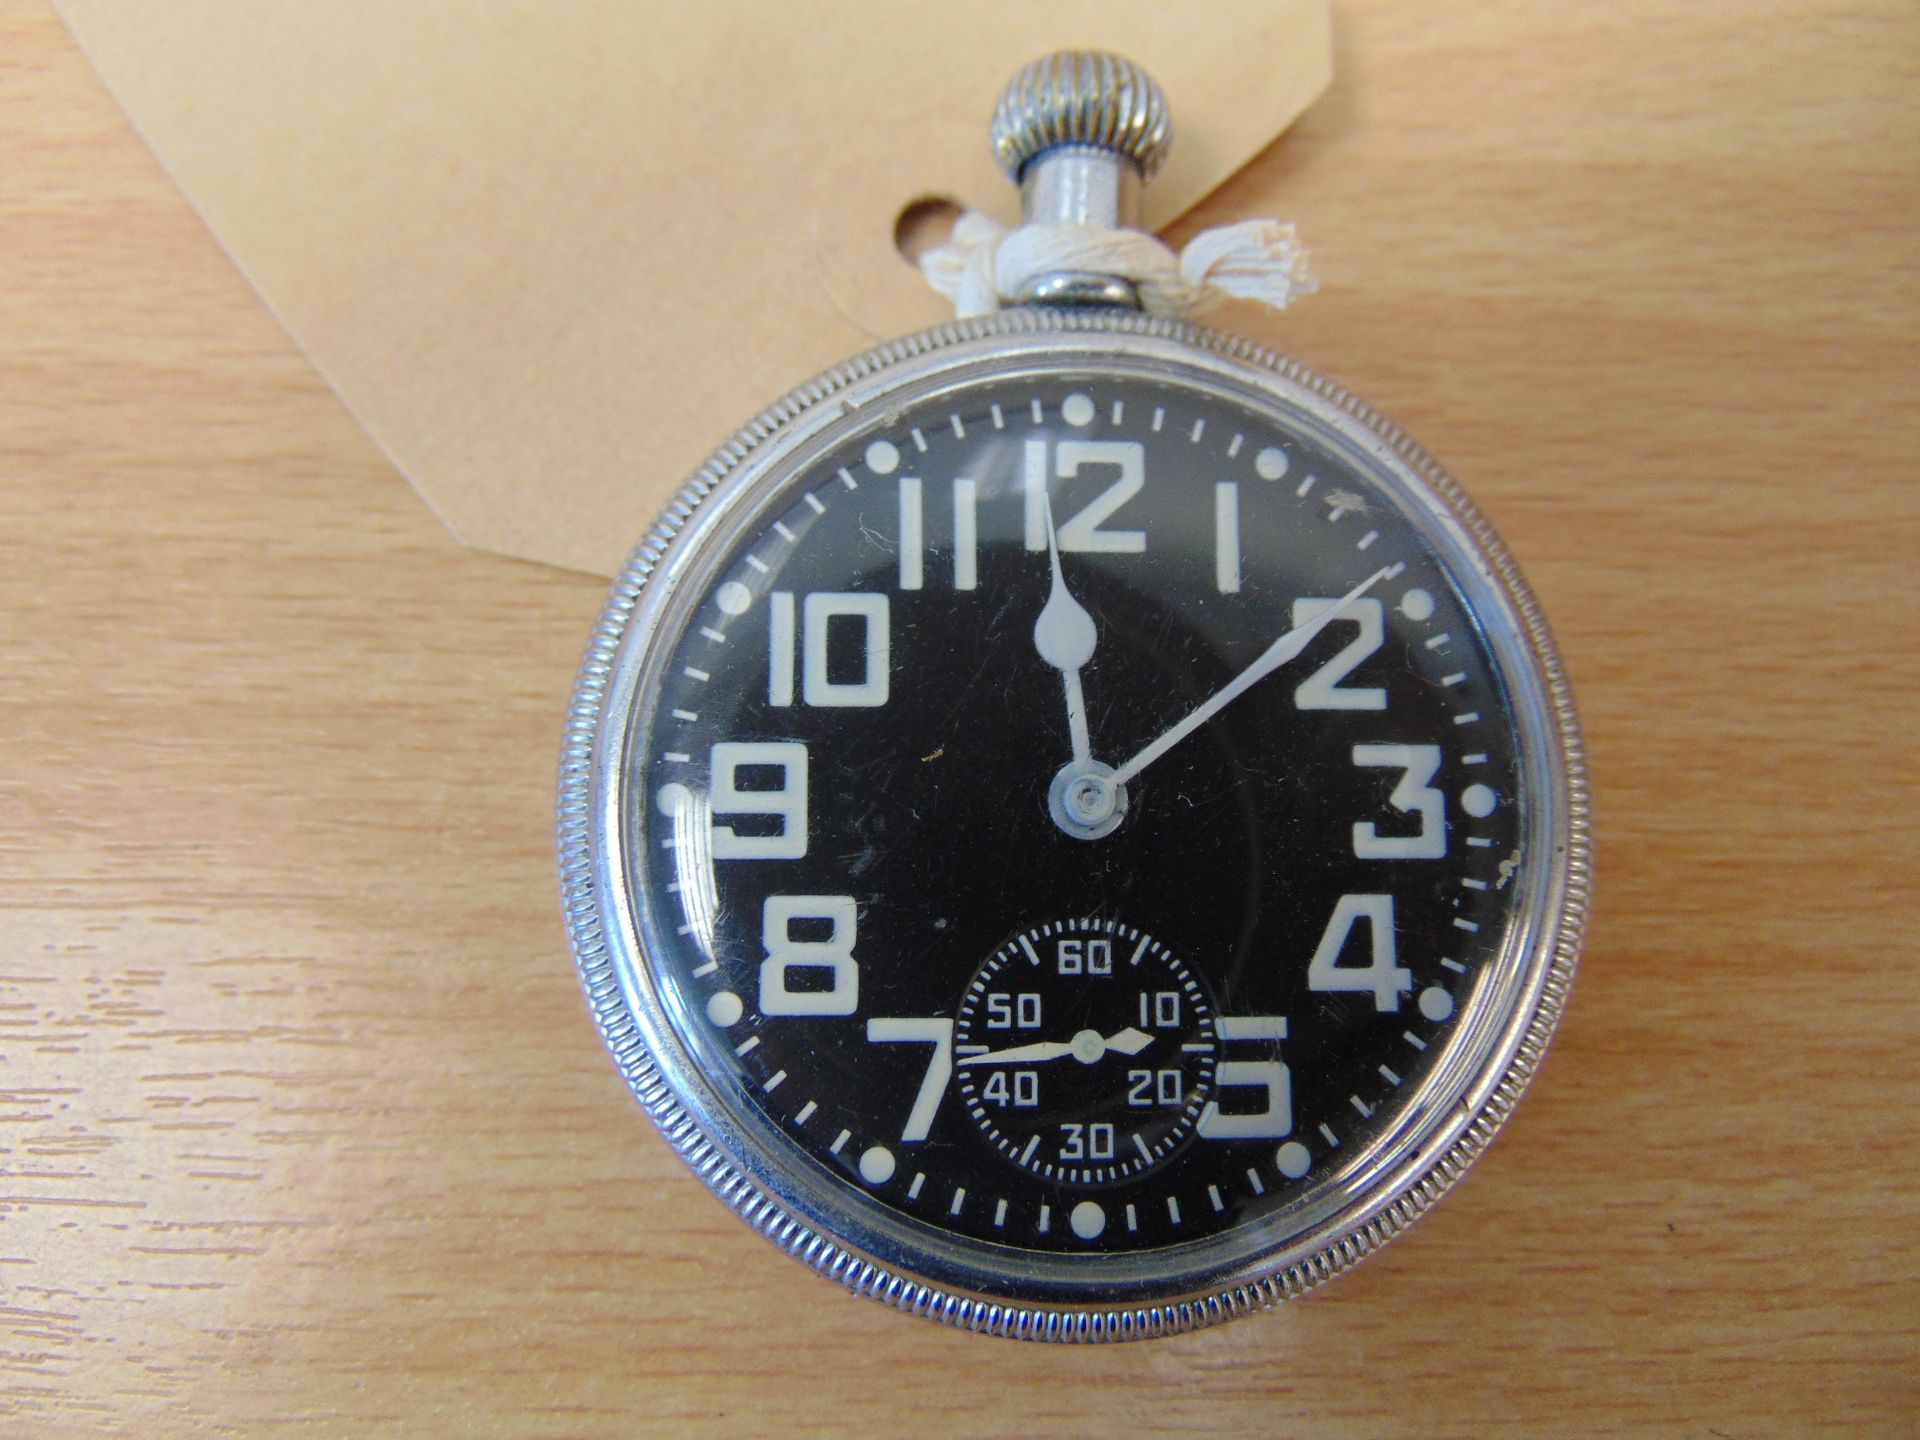 Unusual Waltham 0552 Royal Navy Deck Watch NON-LUM as issued to Nuclear Submarines